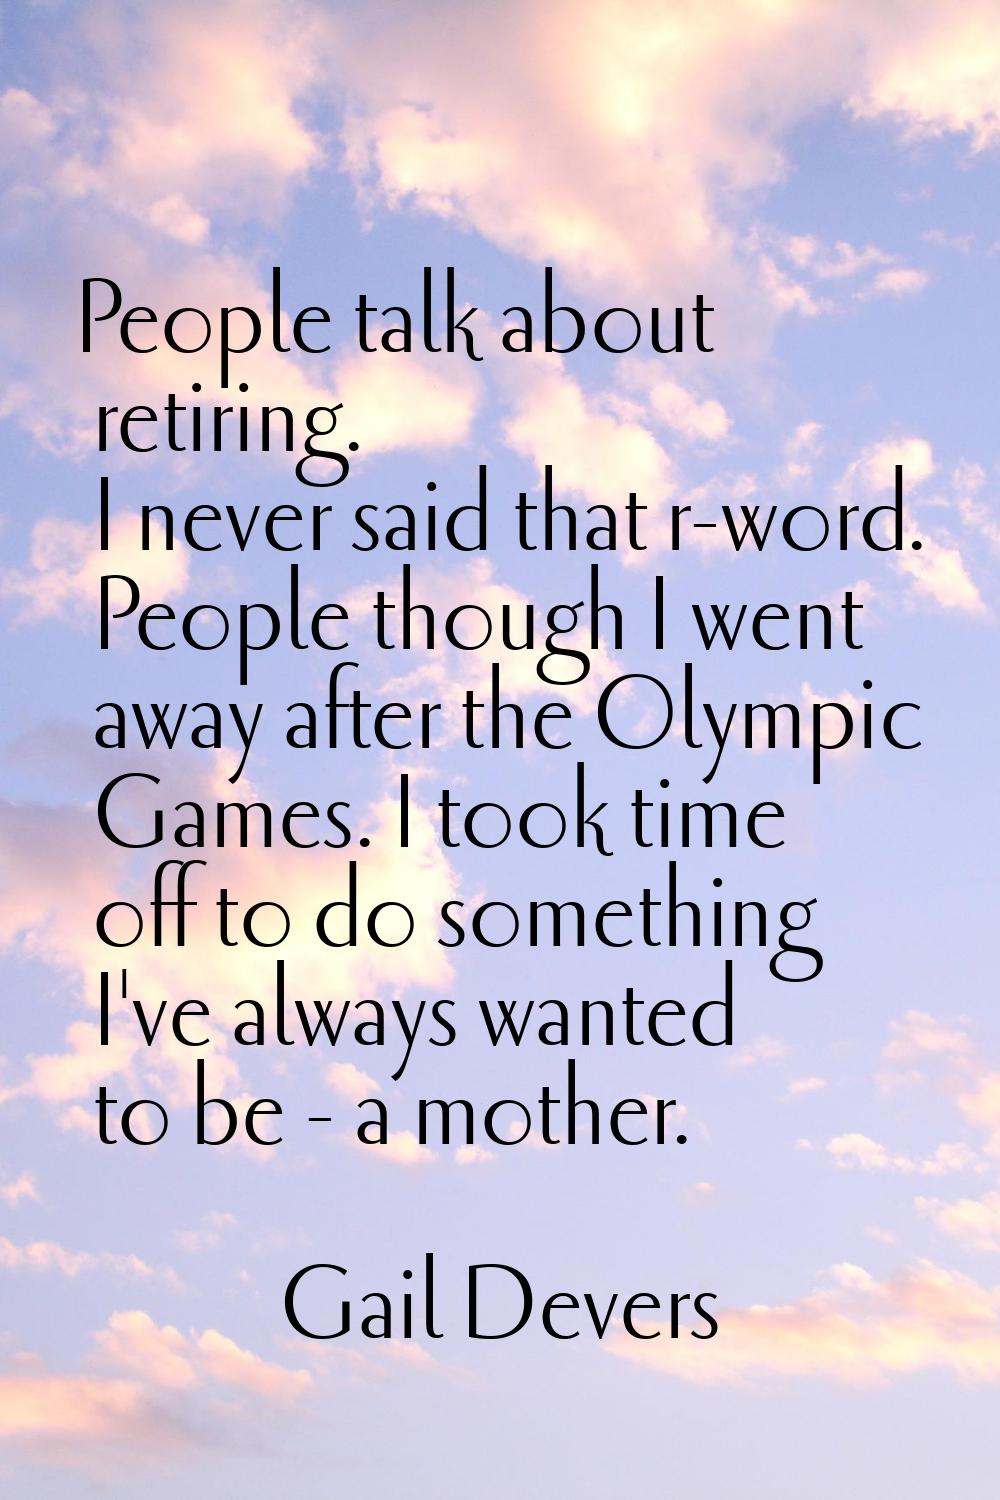 People talk about retiring. I never said that r-word. People though I went away after the Olympic G